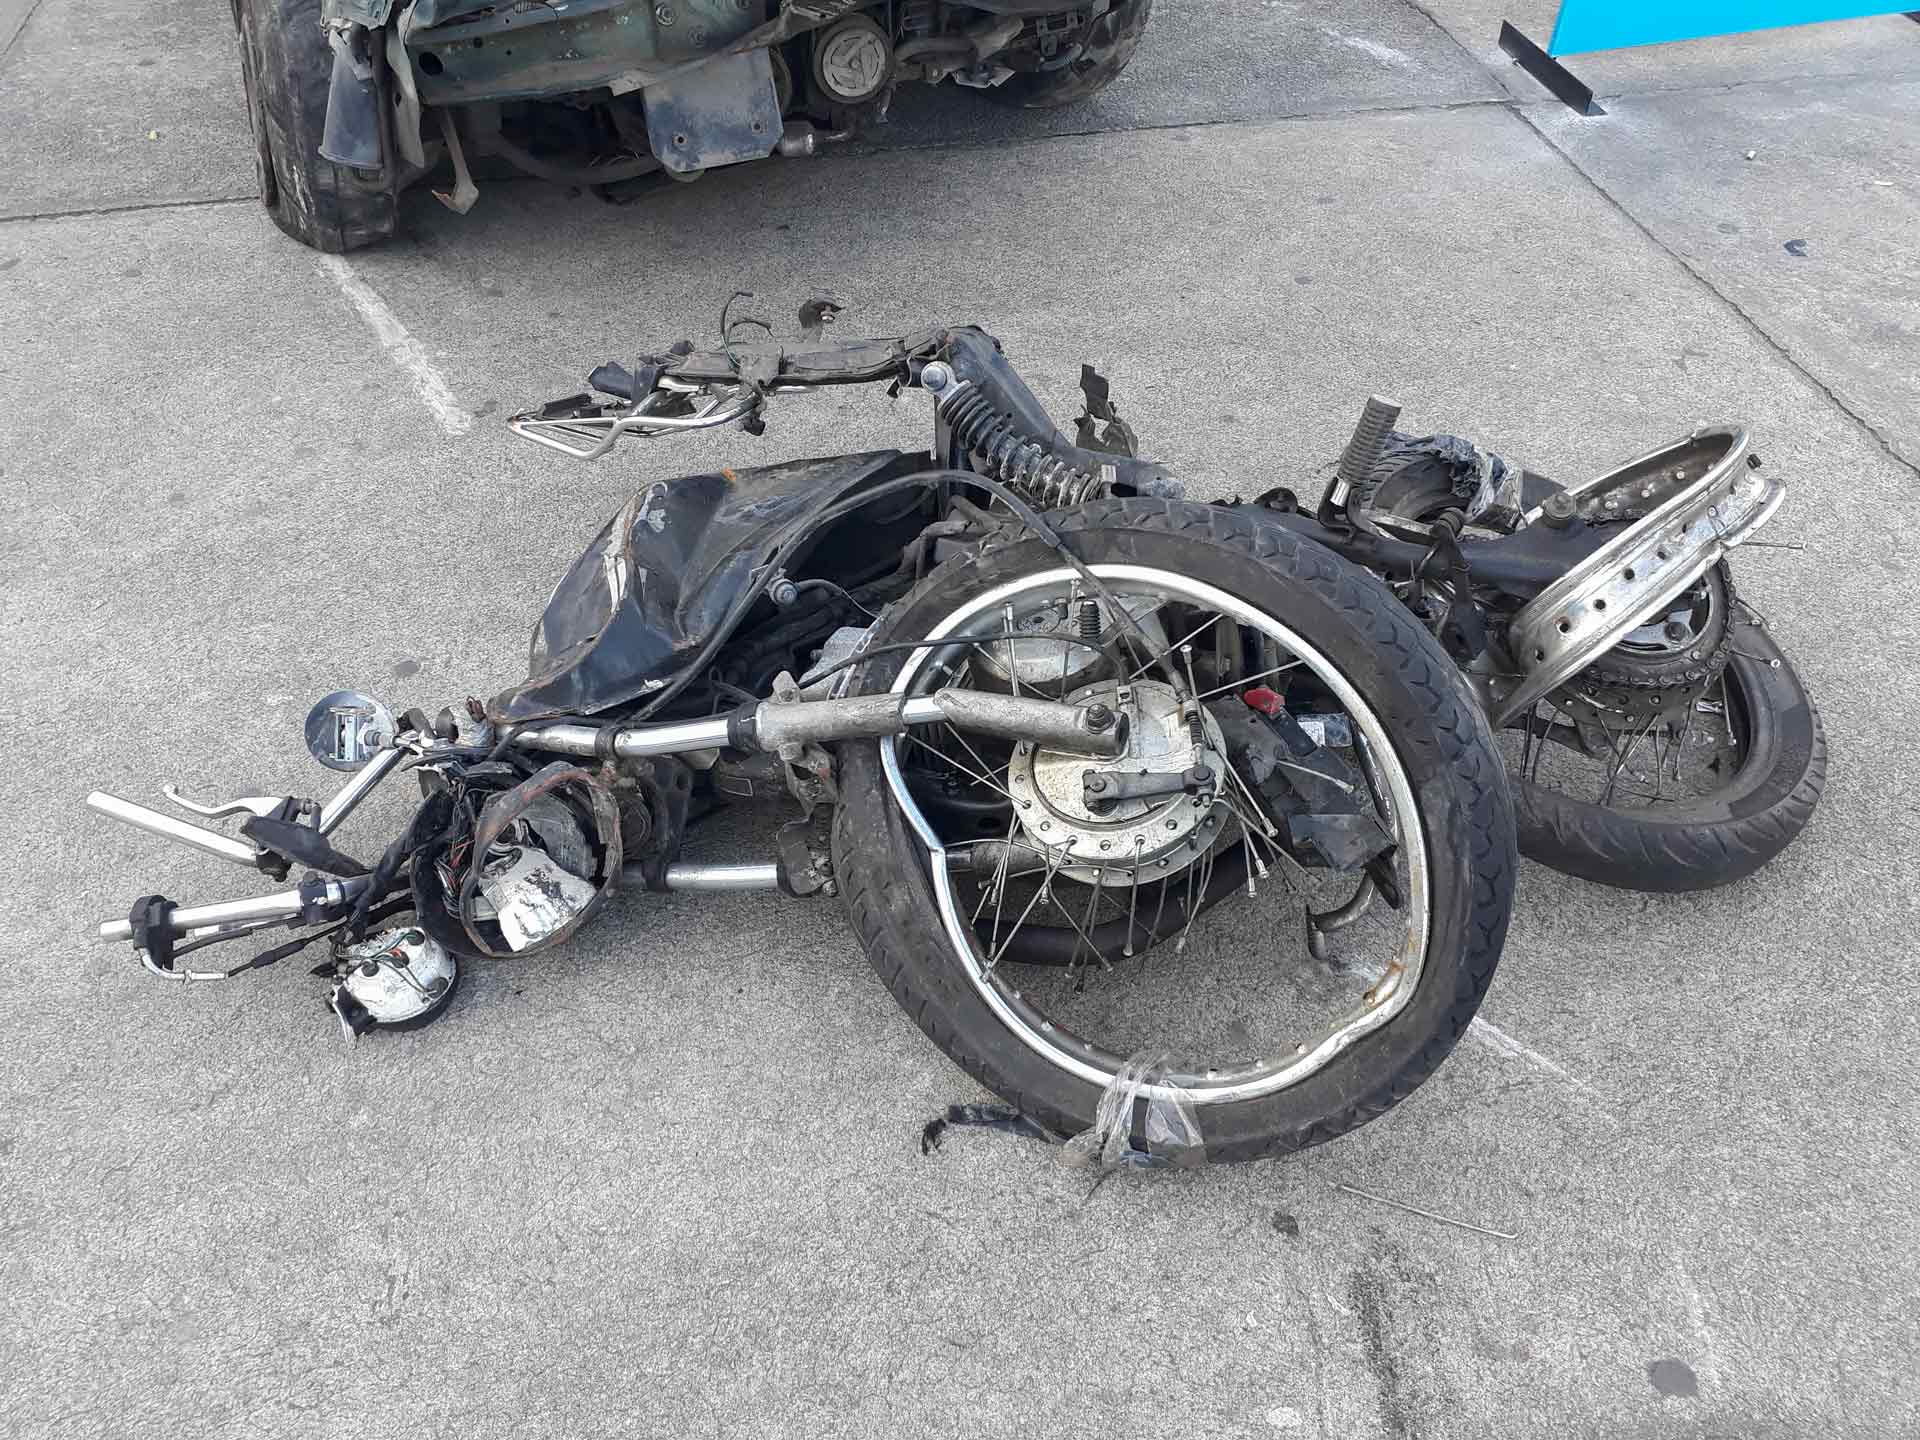 A wrecked motorcycle after a traffic accident